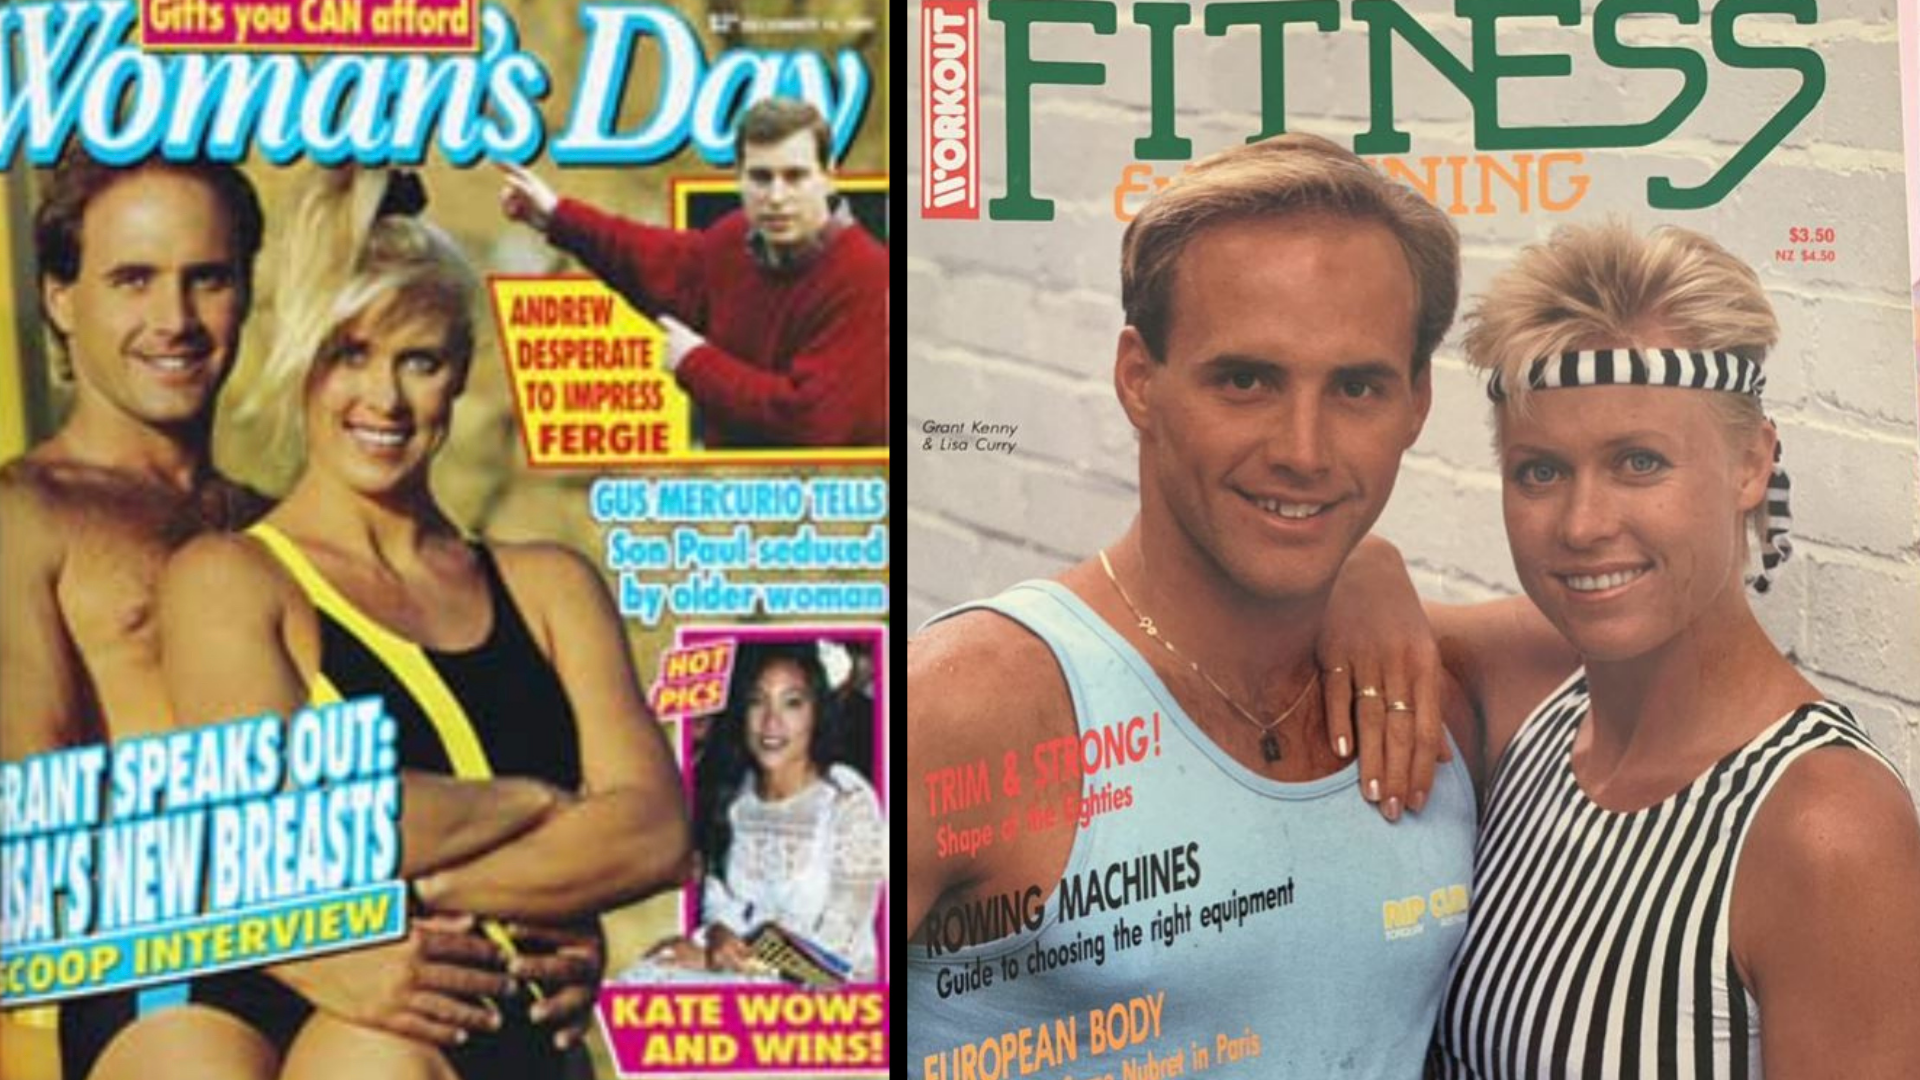 A composite of two magazine covers from the 1980s featuring Lisa Curry and Grant Kenny